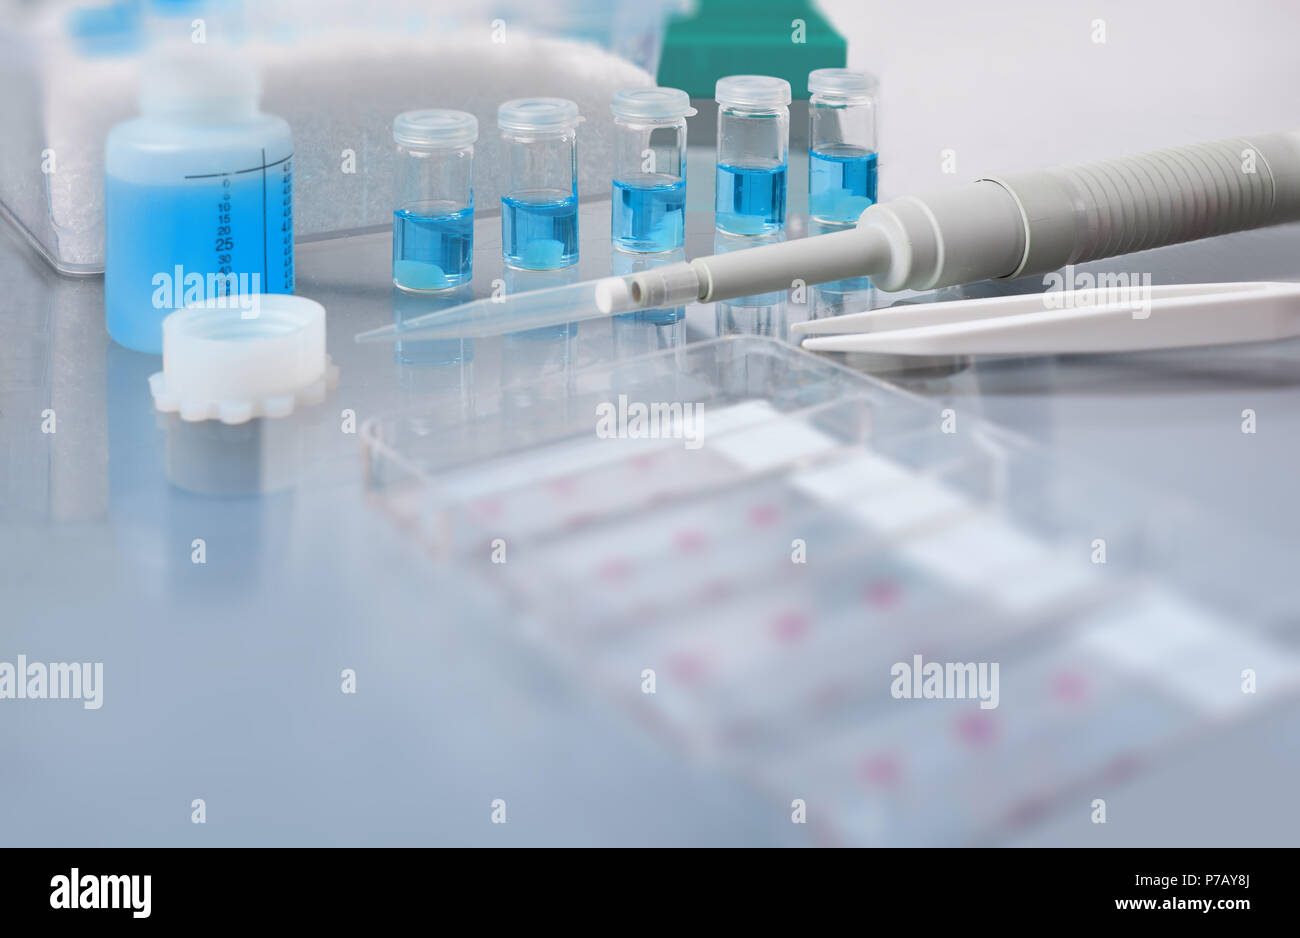 Blurred background for histopathology-related presentation. Stained histological tissue samples on glass, fixed tissue, automatic pipette and other wo Stock Photo